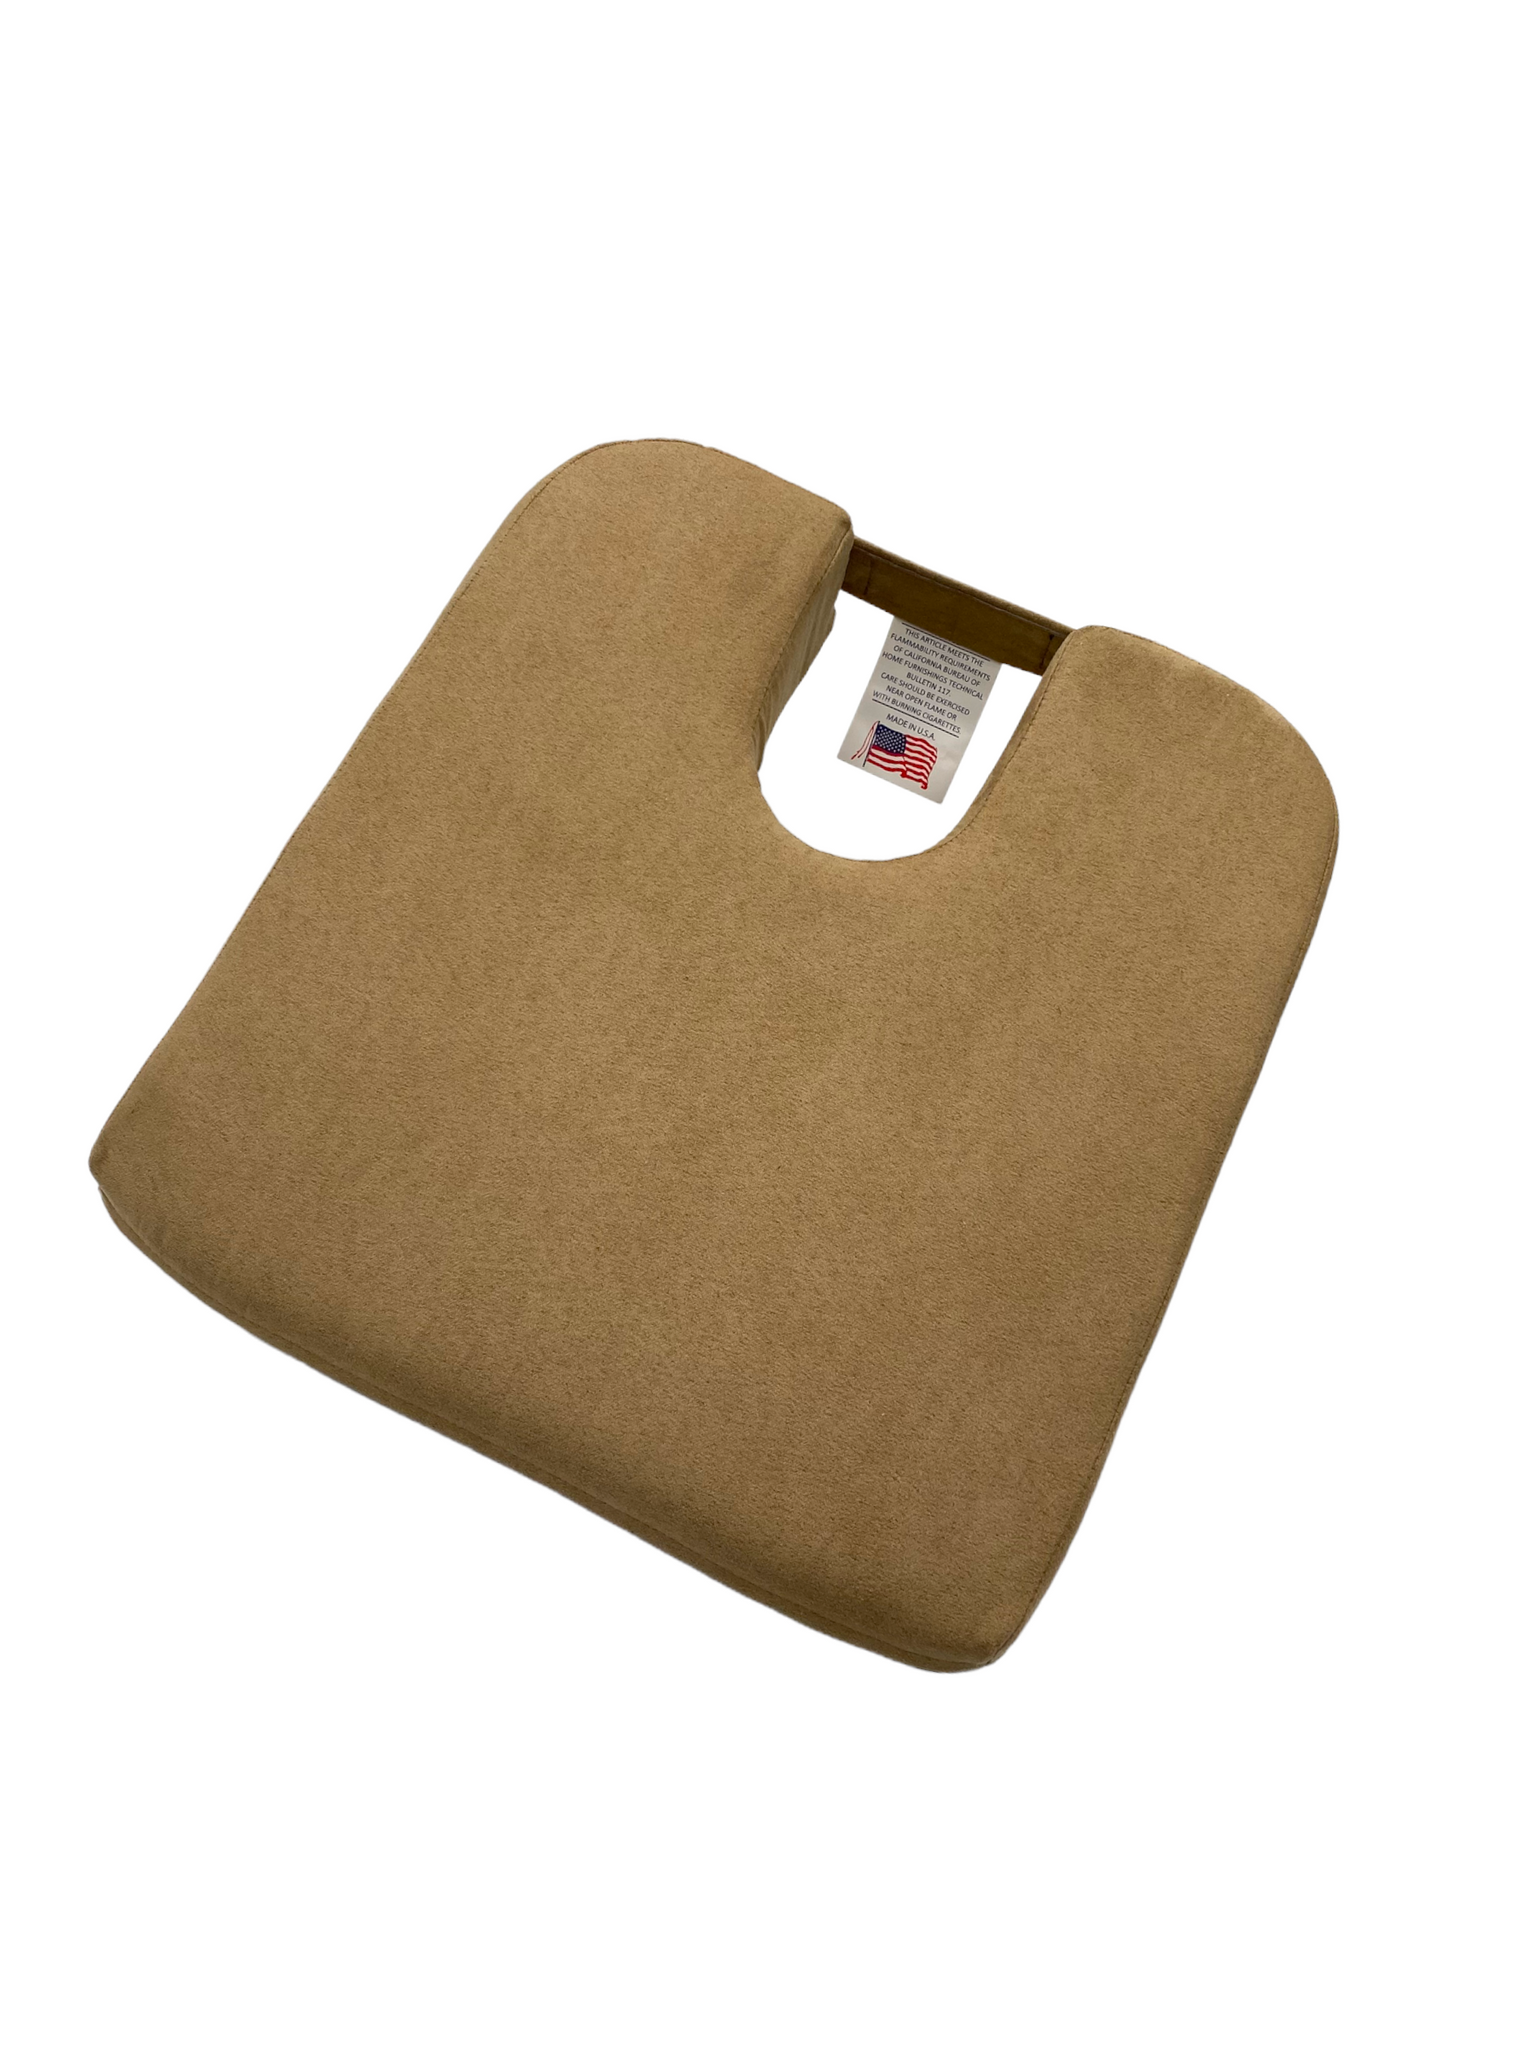 Extra Firm Extended Width Tush Cush Seat Cushion Relieves and